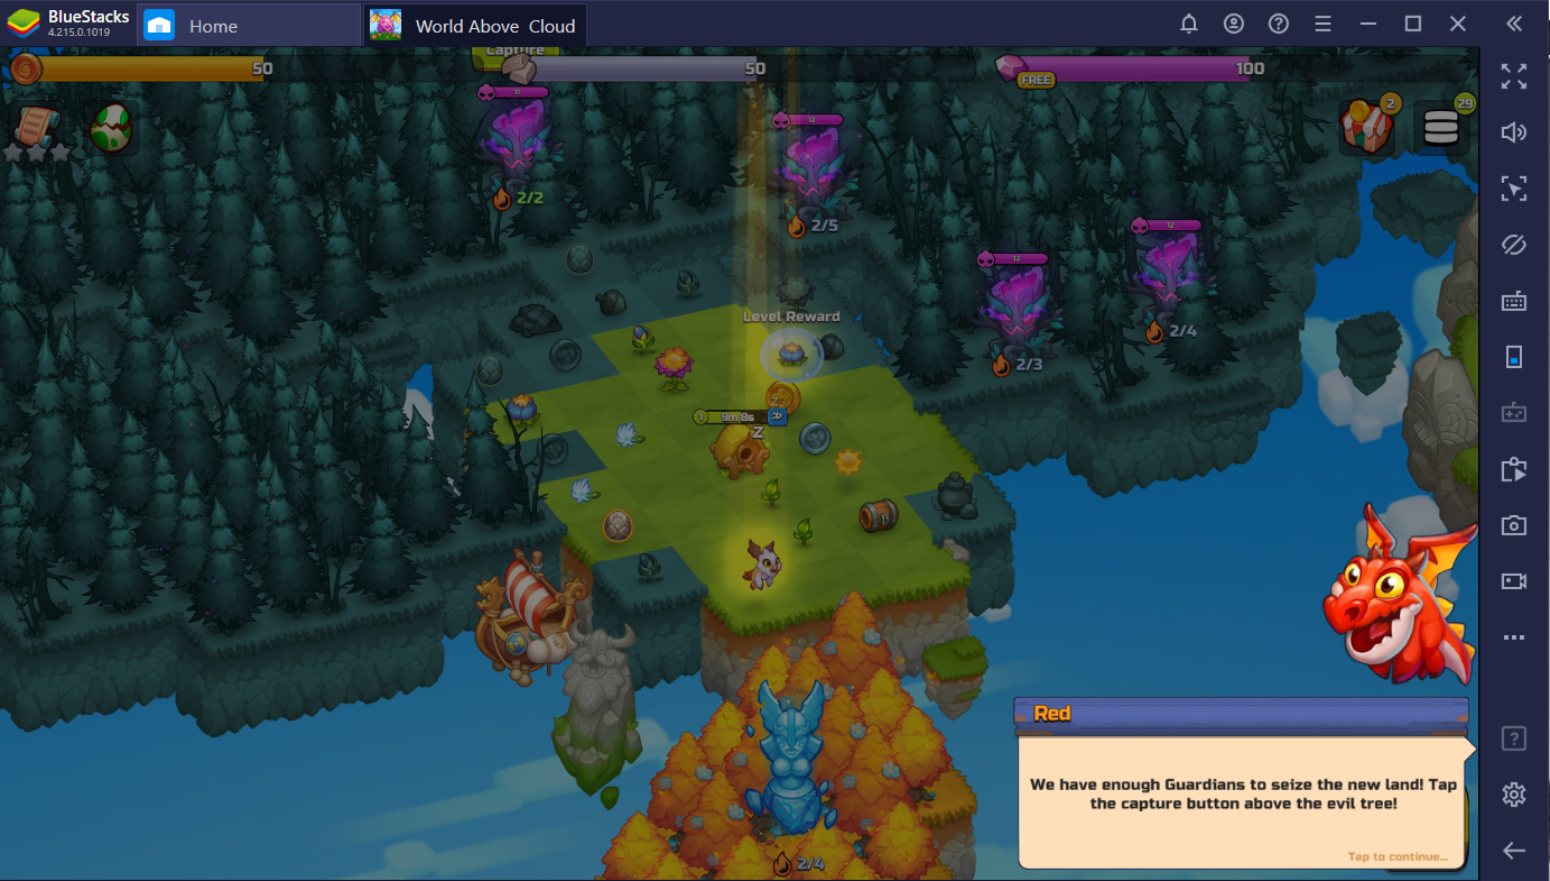 Play World Above on PC with BlueStacks